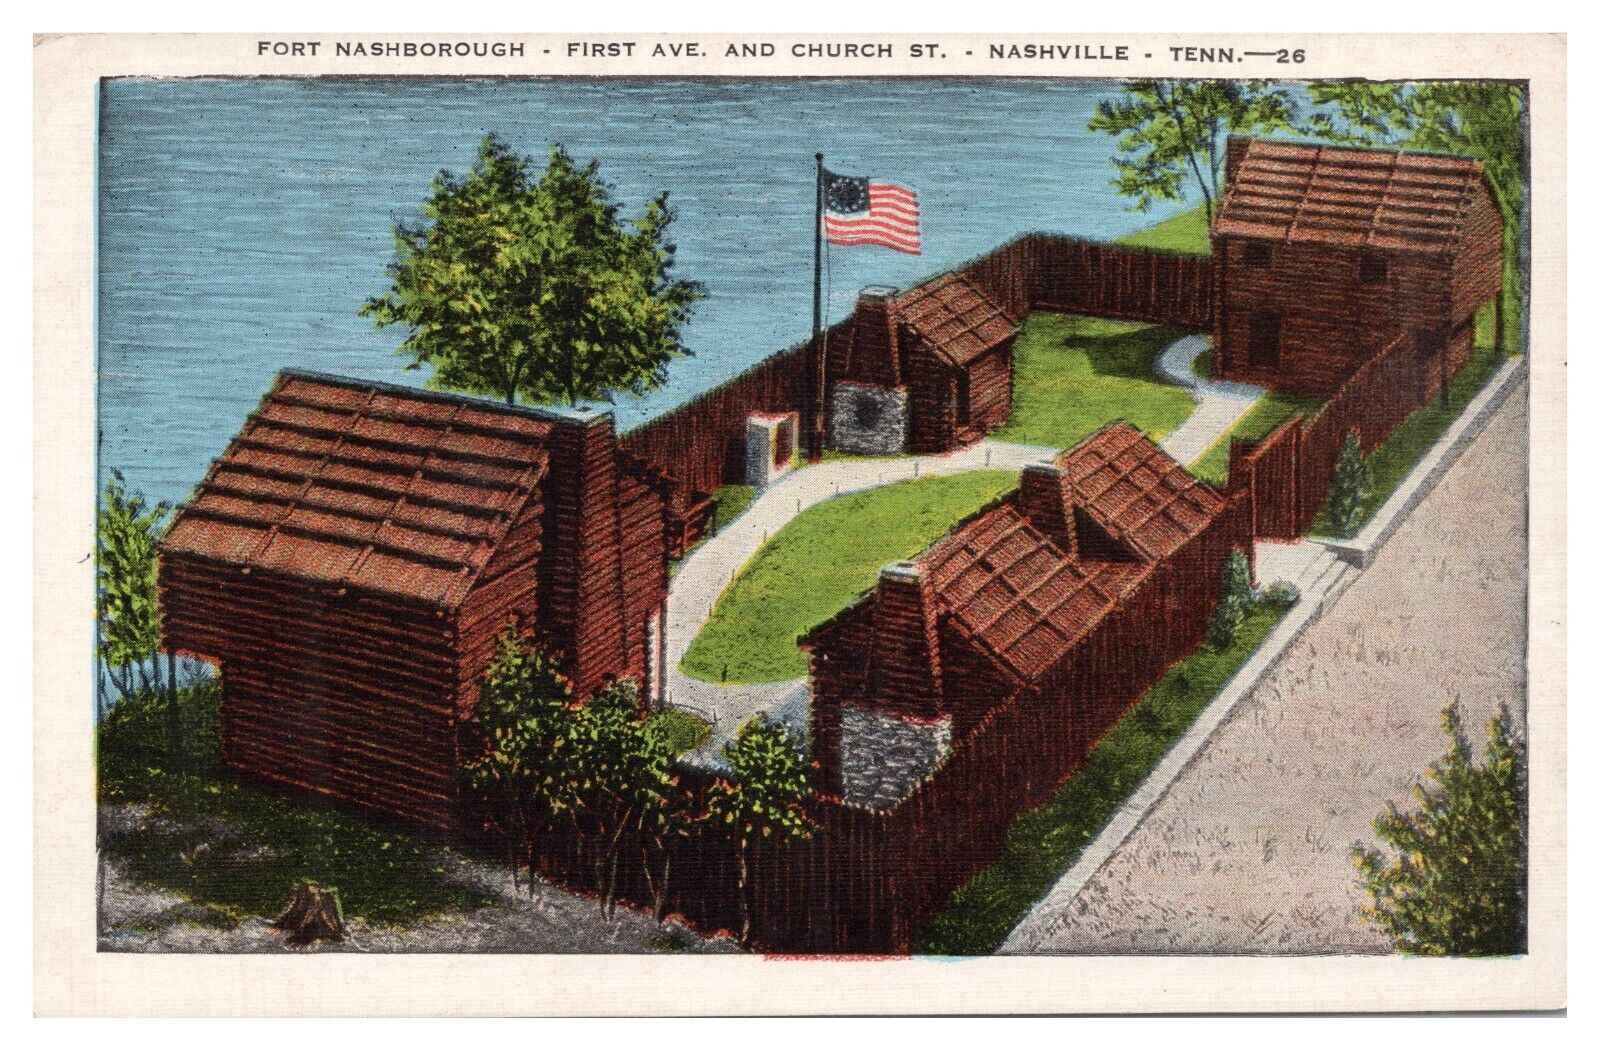 Vintage Nashville Tennessee Postcard Fort Nashborough First Ave. and Church St.